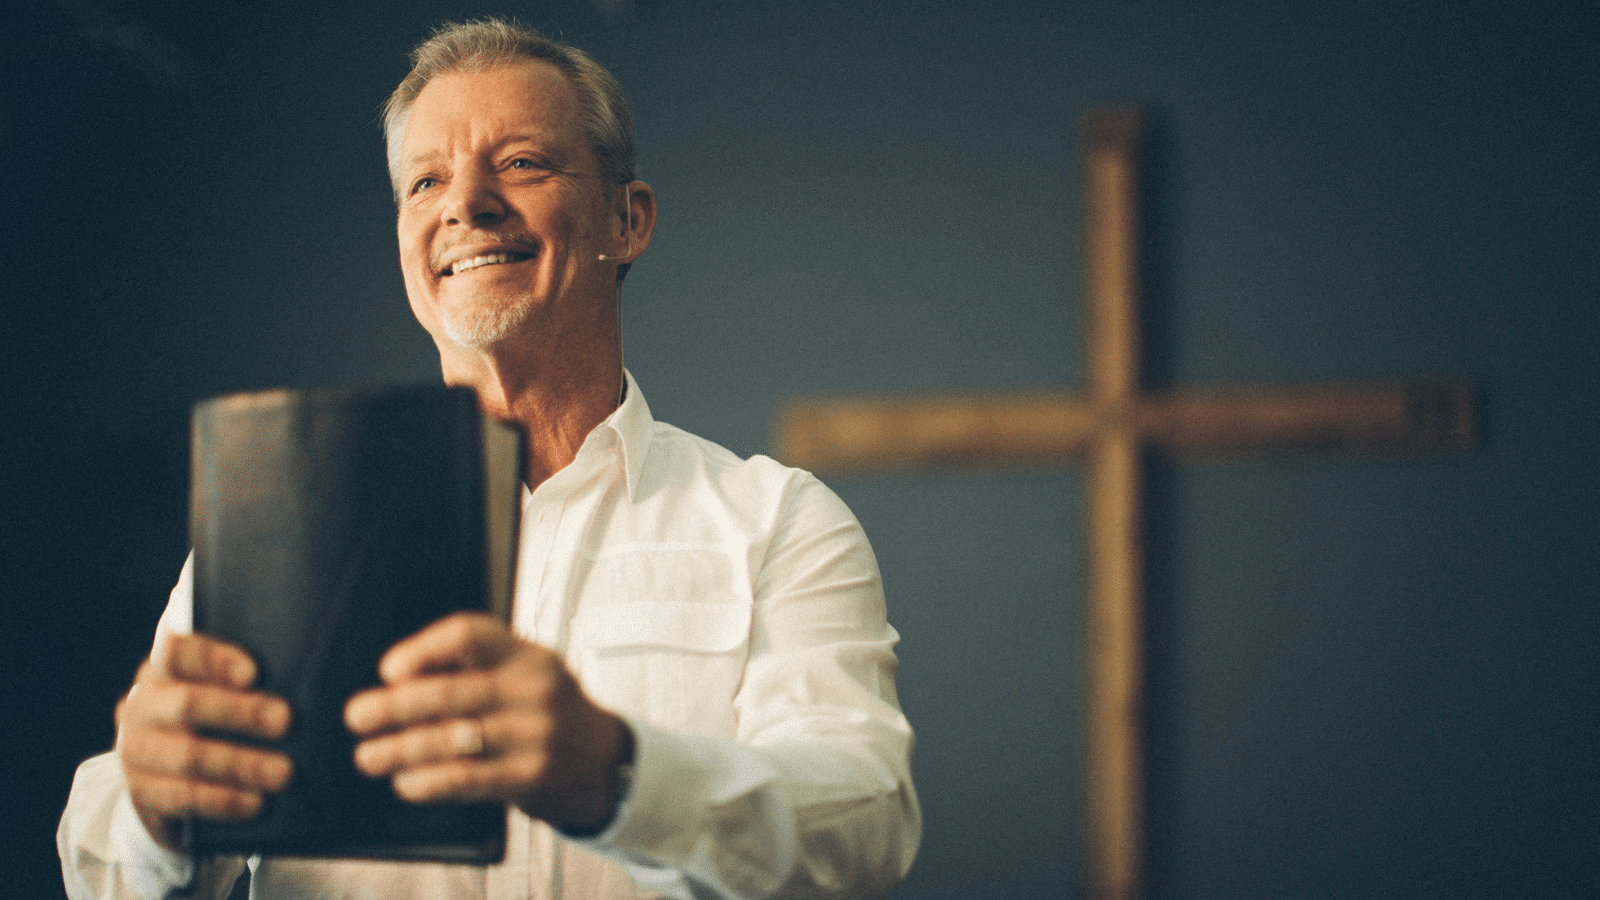 A pastor in front of a cross holding a bible.